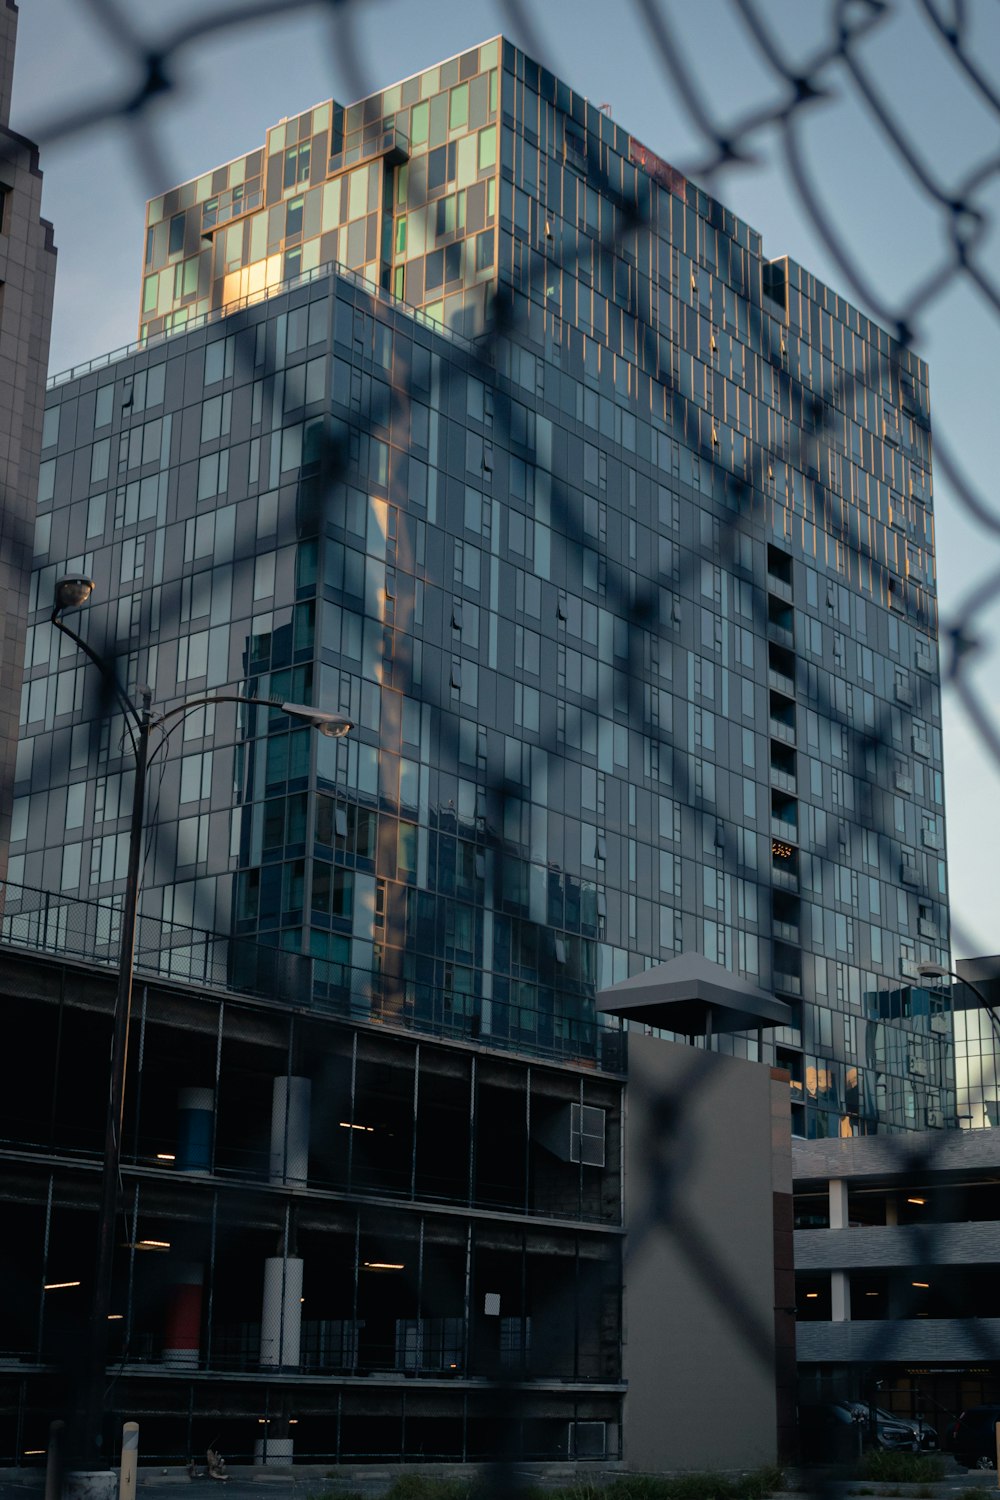 a tall building behind a chain link fence